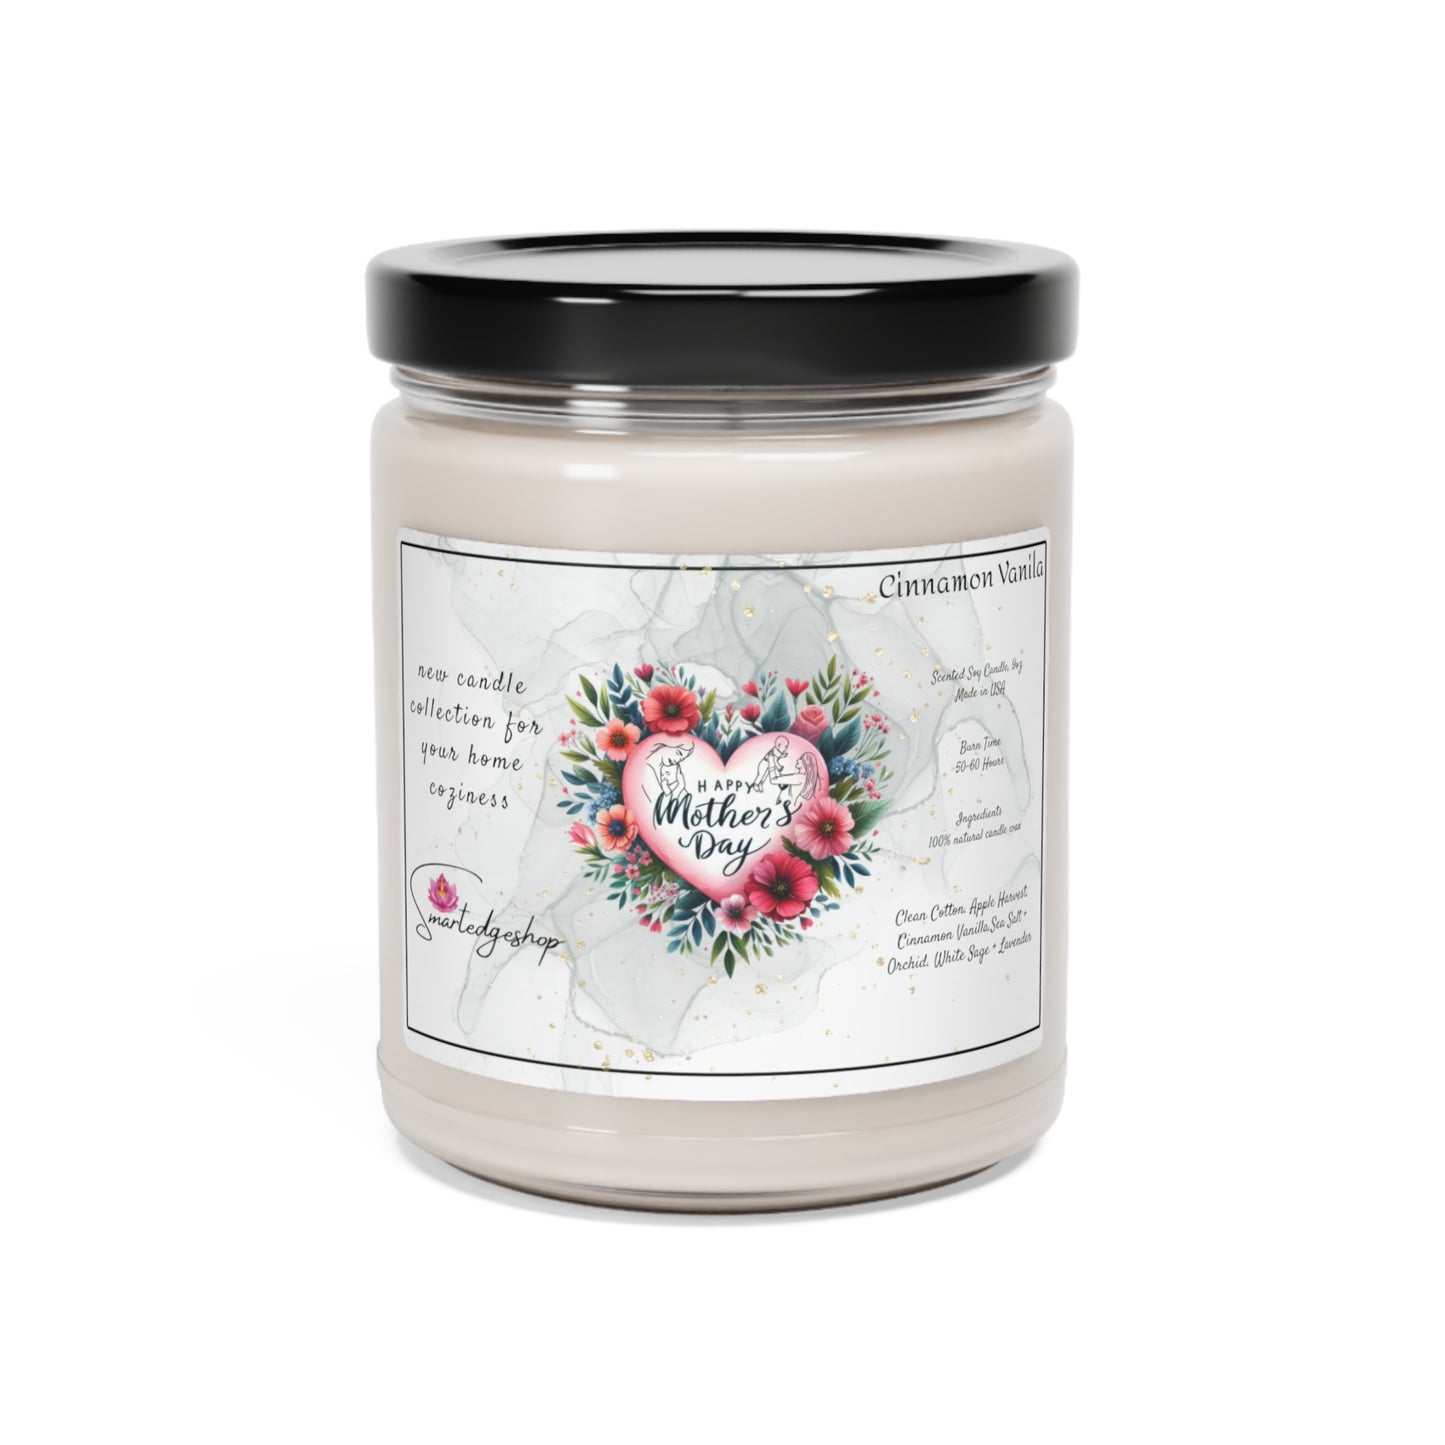 Happy Mother's Day Scented Soy Candle, 9oz, Gift for mom